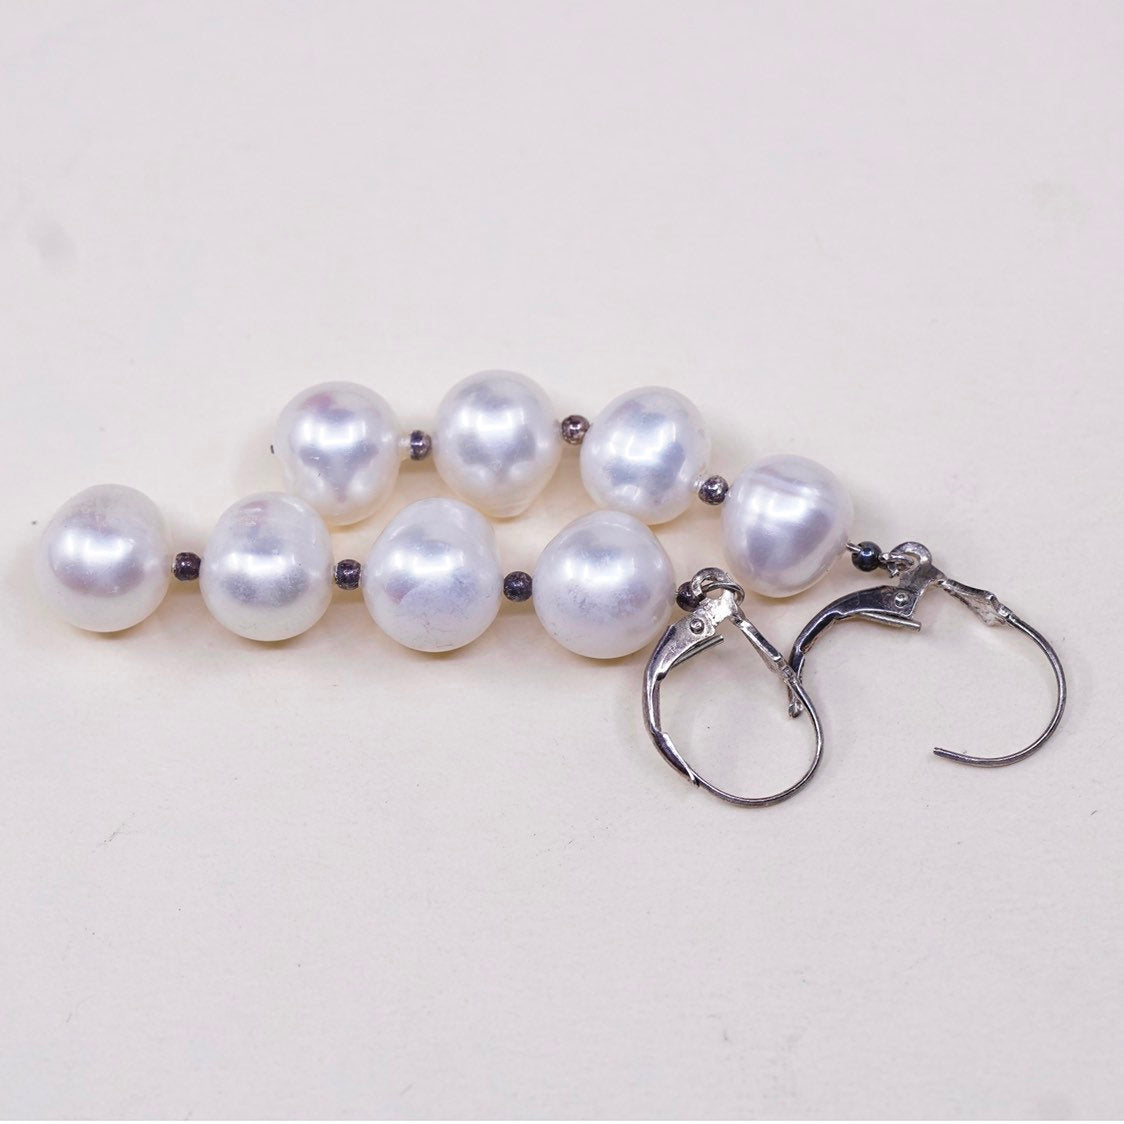 vtg Sterling silver handmade earrings, 925 hooks with pearl drops, stamped 925